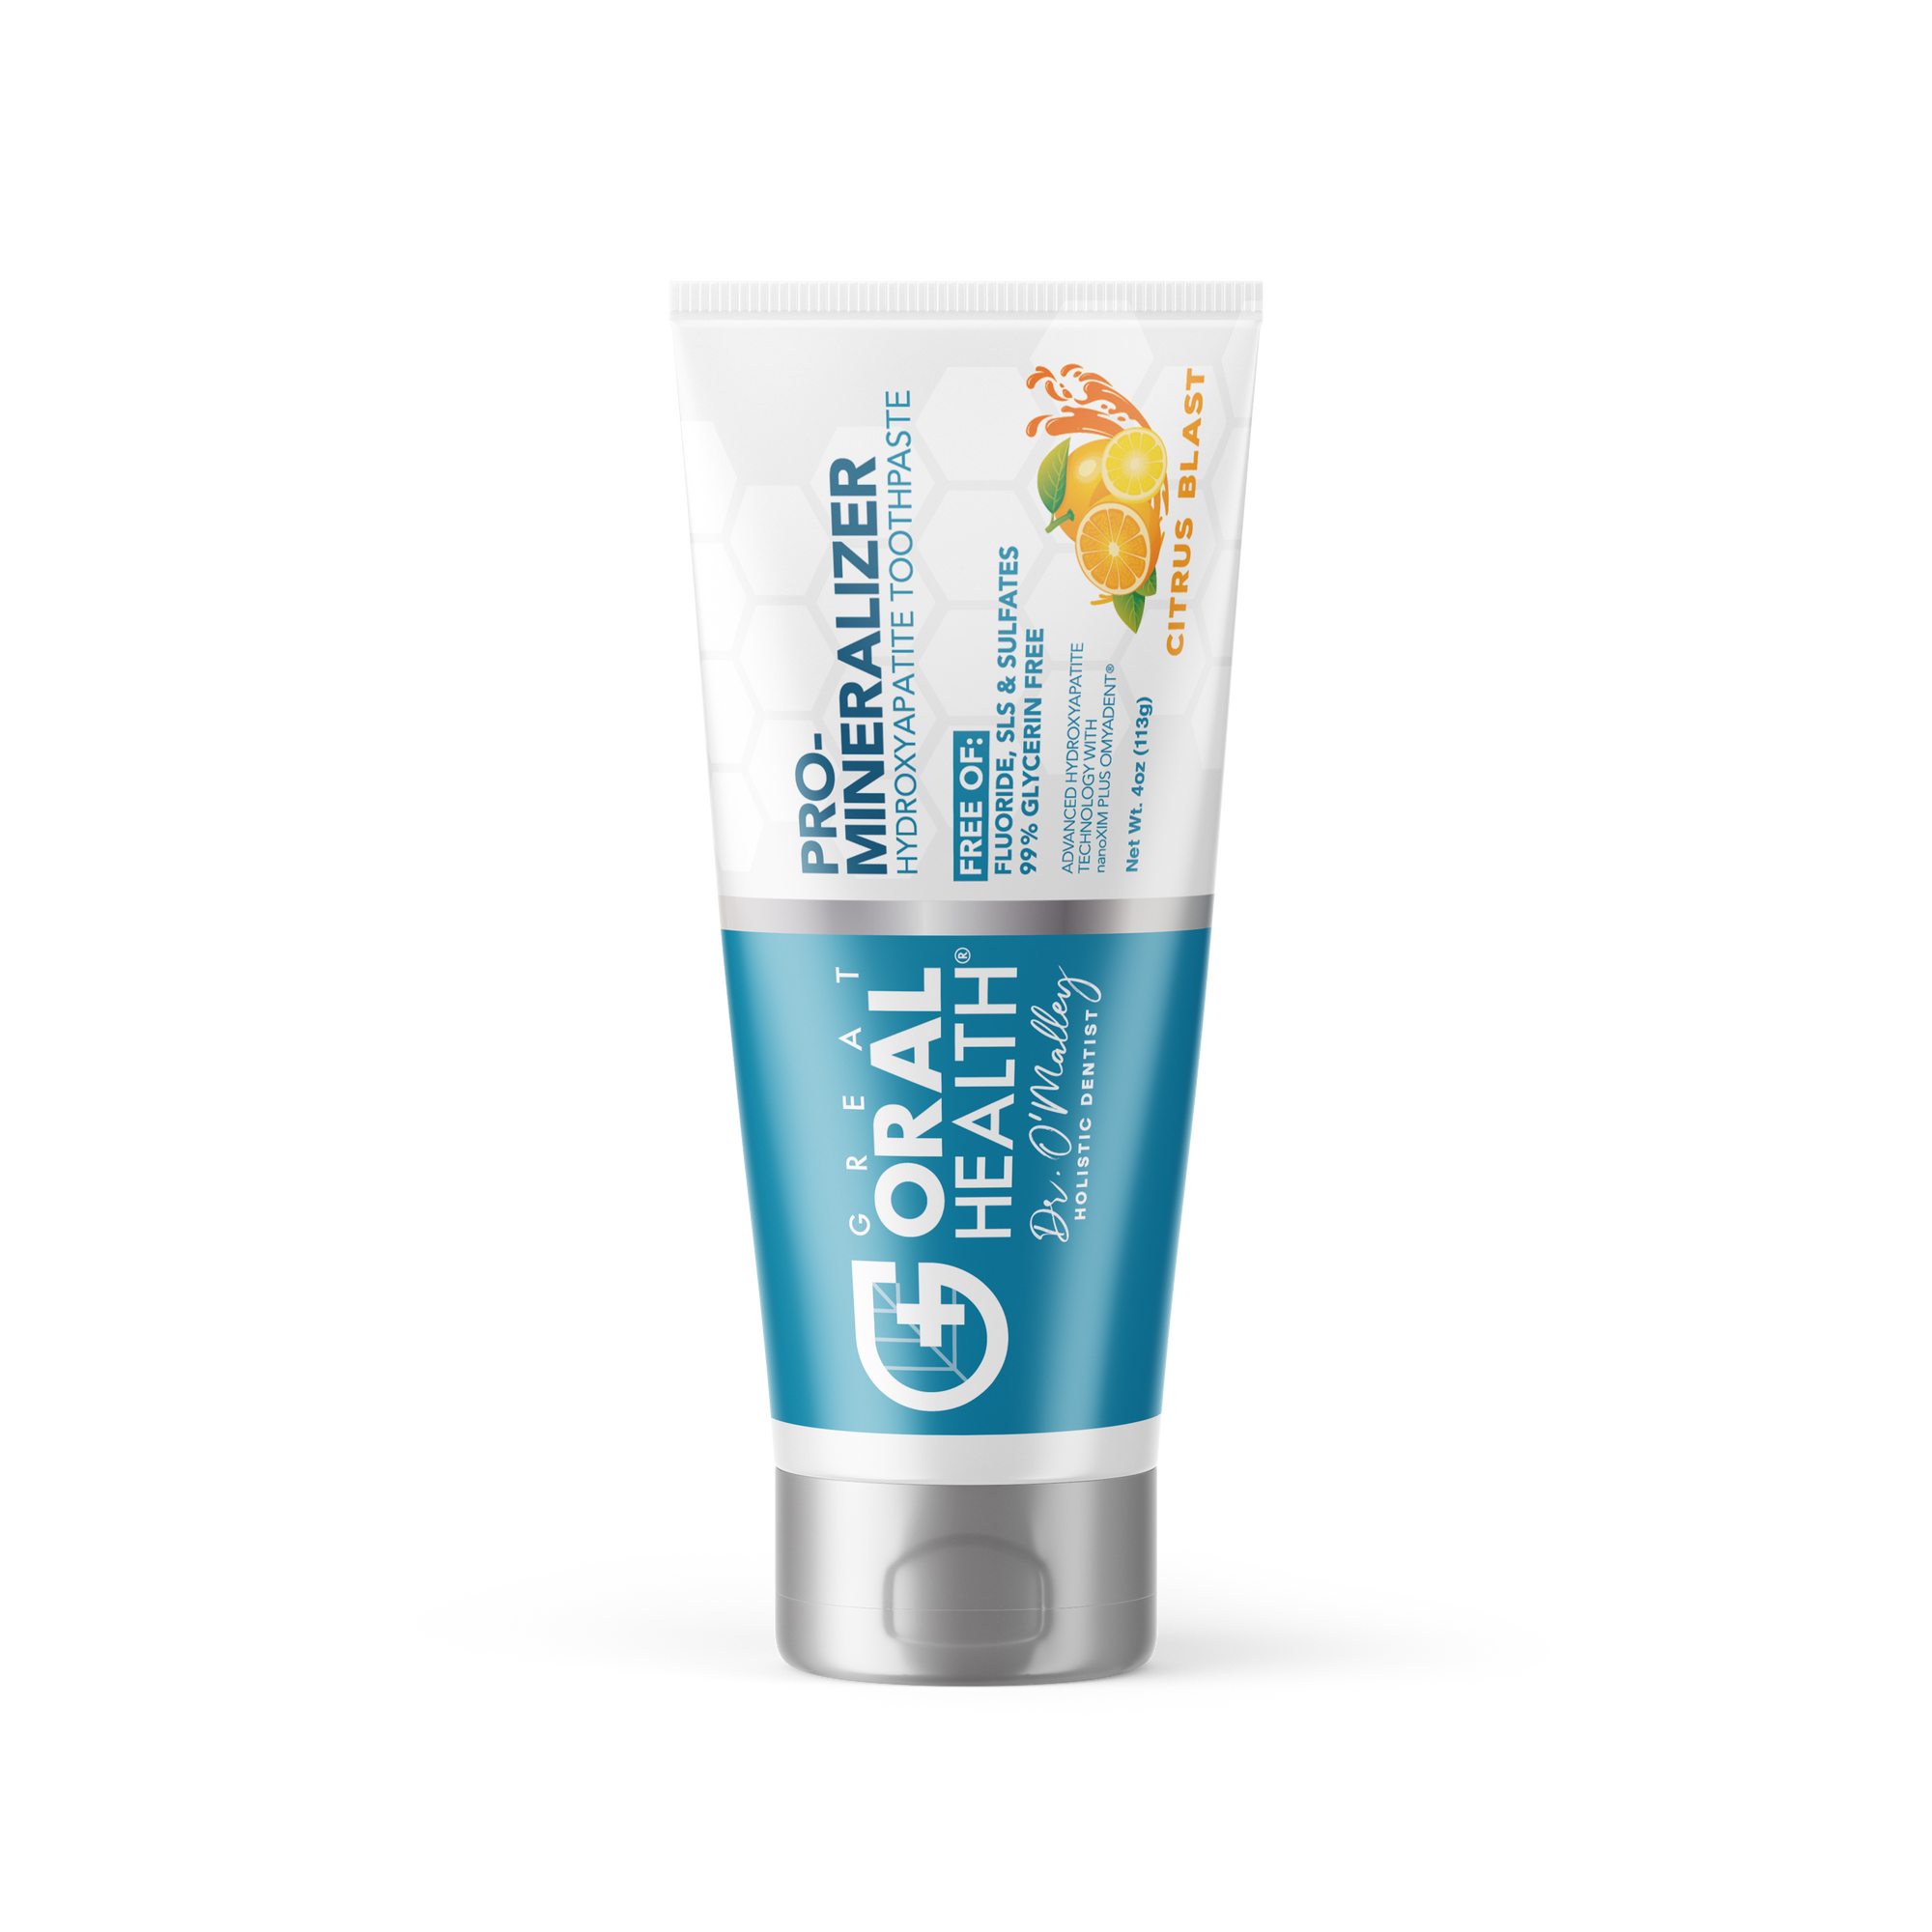 Dentist Formulated Fluoride Free Remineralizing Toothpaste with Nano Hydroxyapatite for Enamel Repair and Sensitive Teeth Citrus Blast Flavor